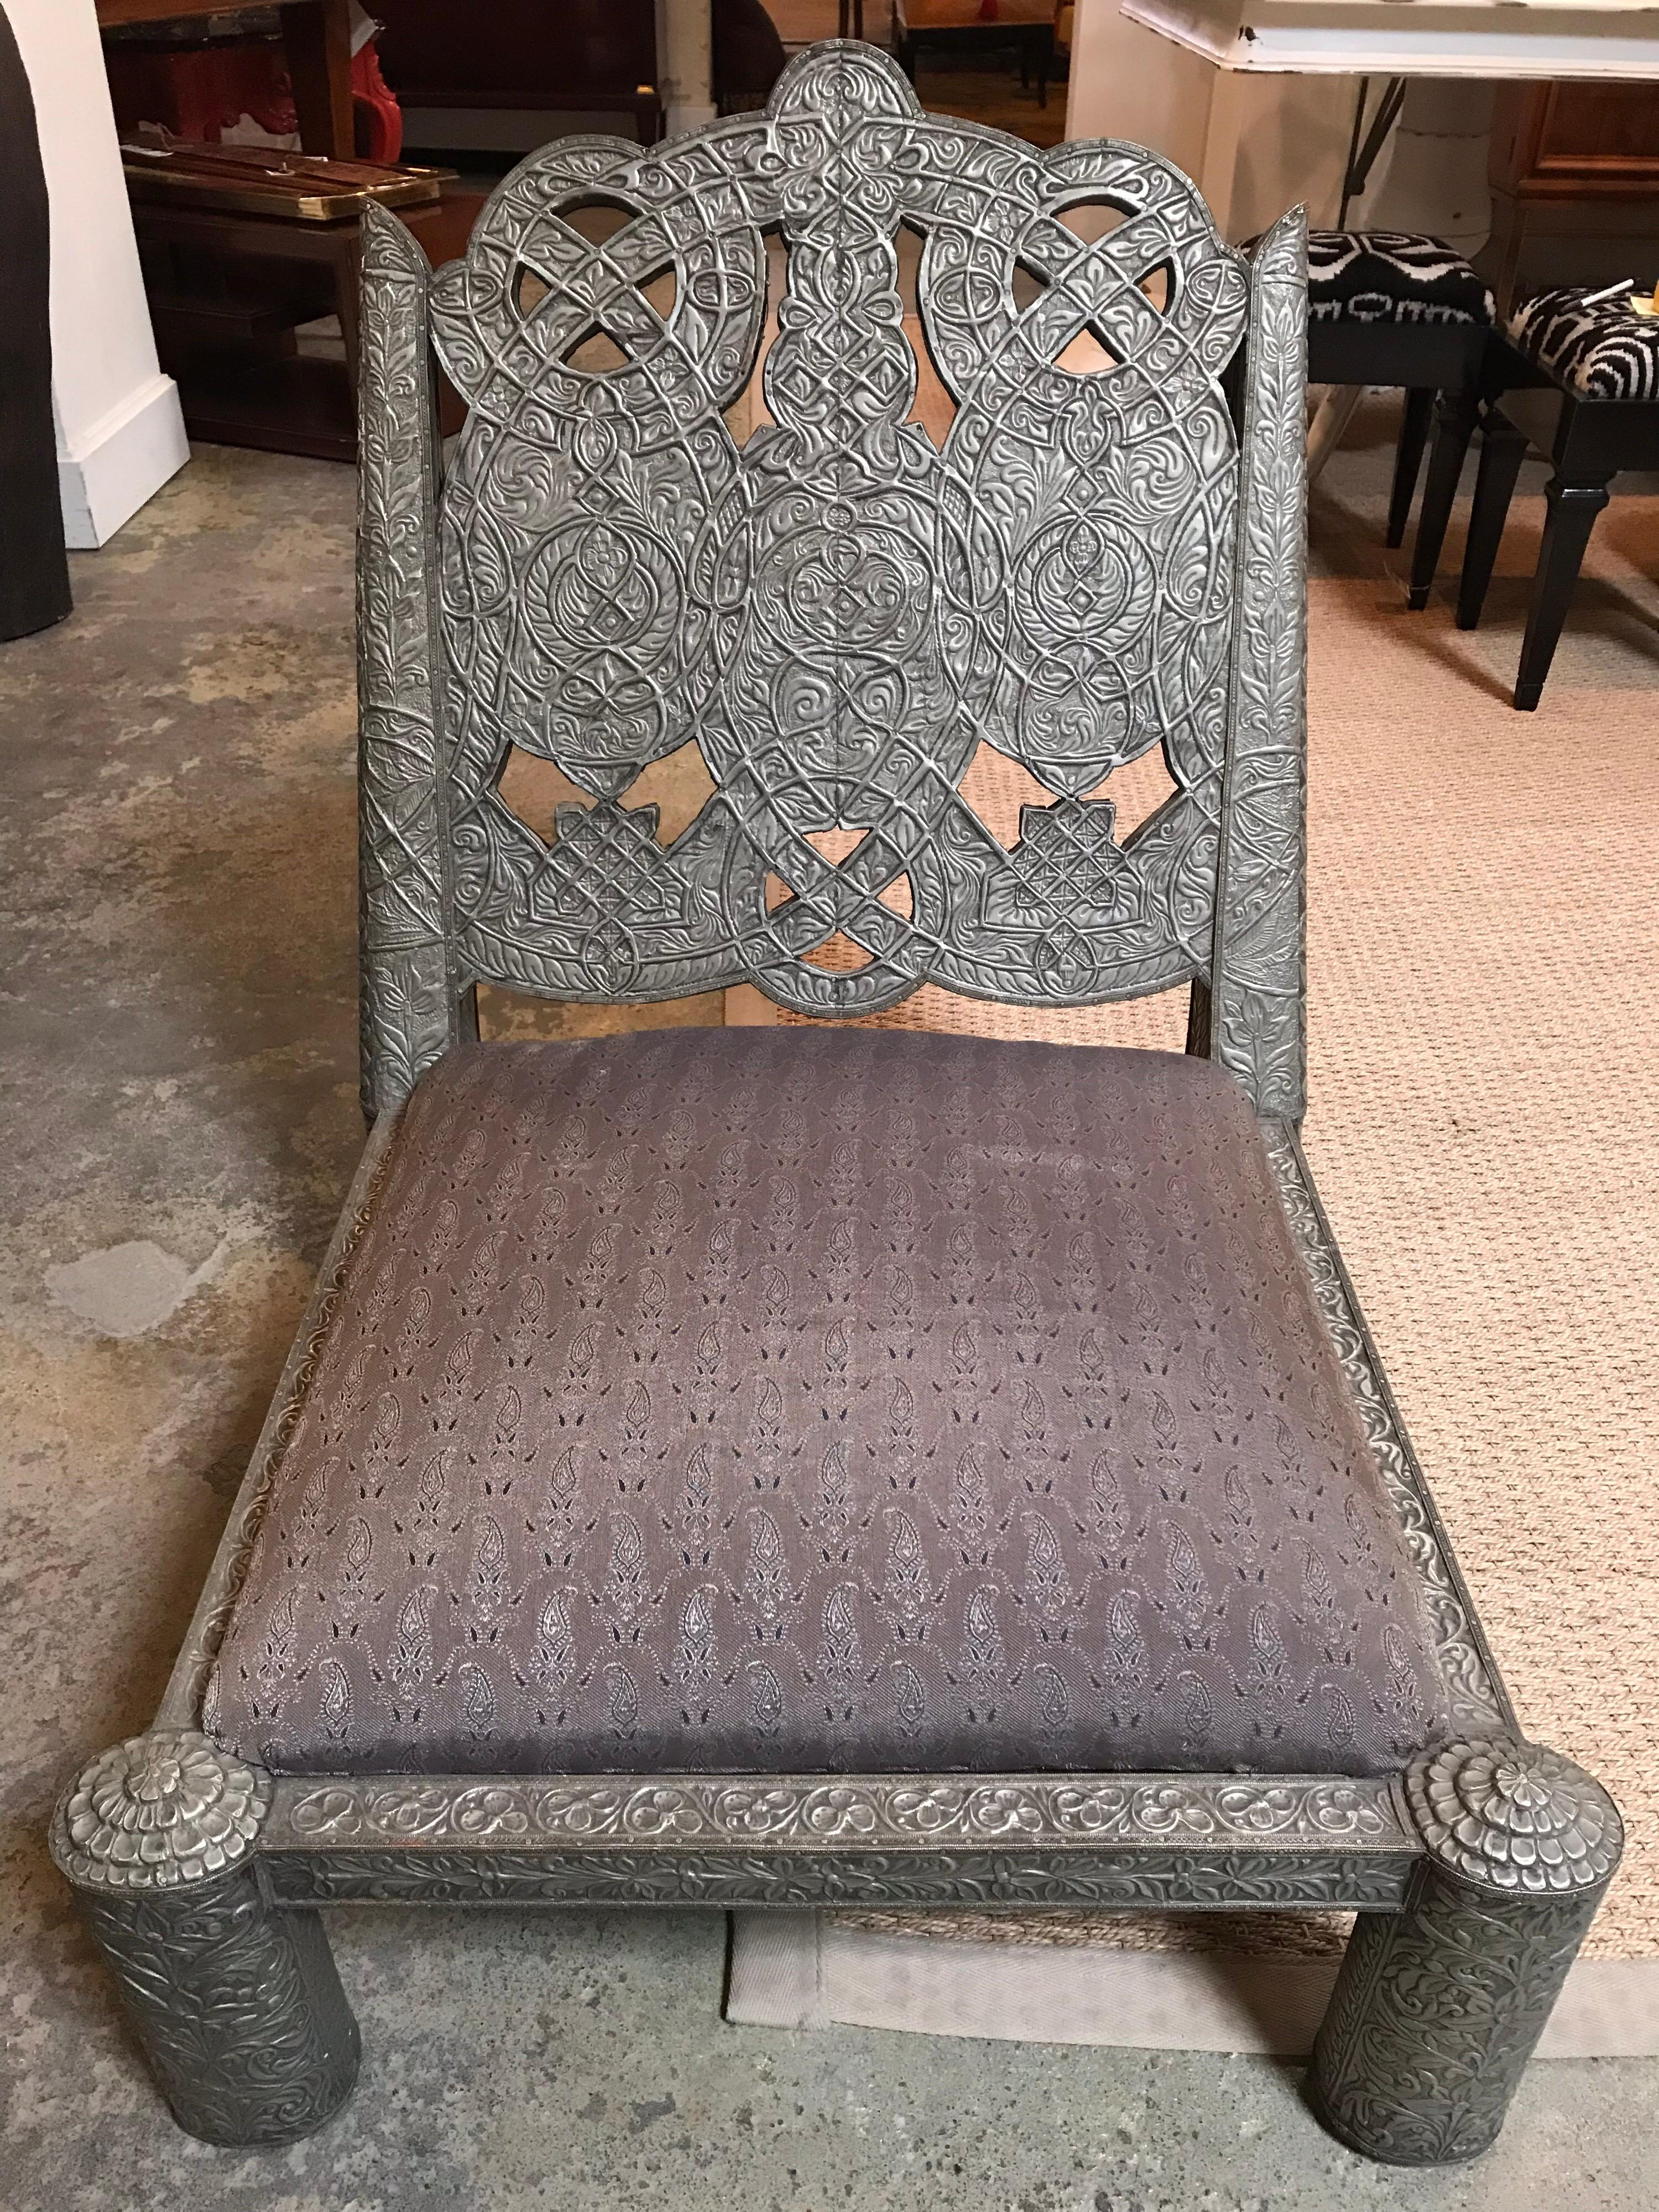 This maharaja repousse chair is covered in a thin layer of hand worked metal that is fastened to the chair with traditional means. The seat height is just under 13 inches.